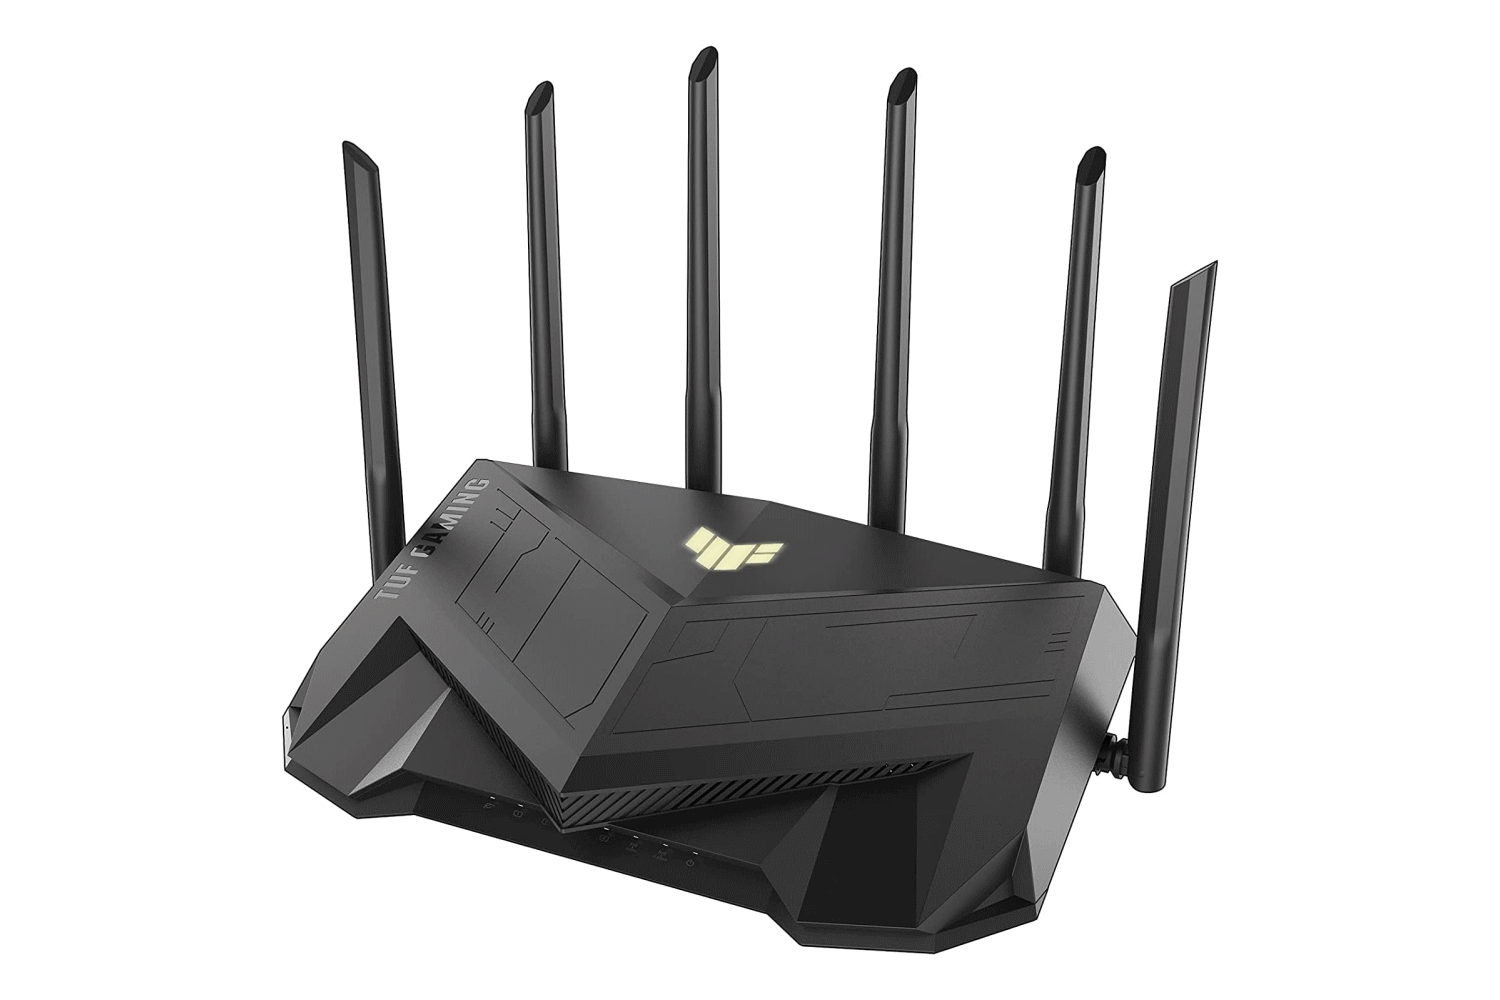 6 Best Budget WiFi Routers for Gaming Guiding Tech